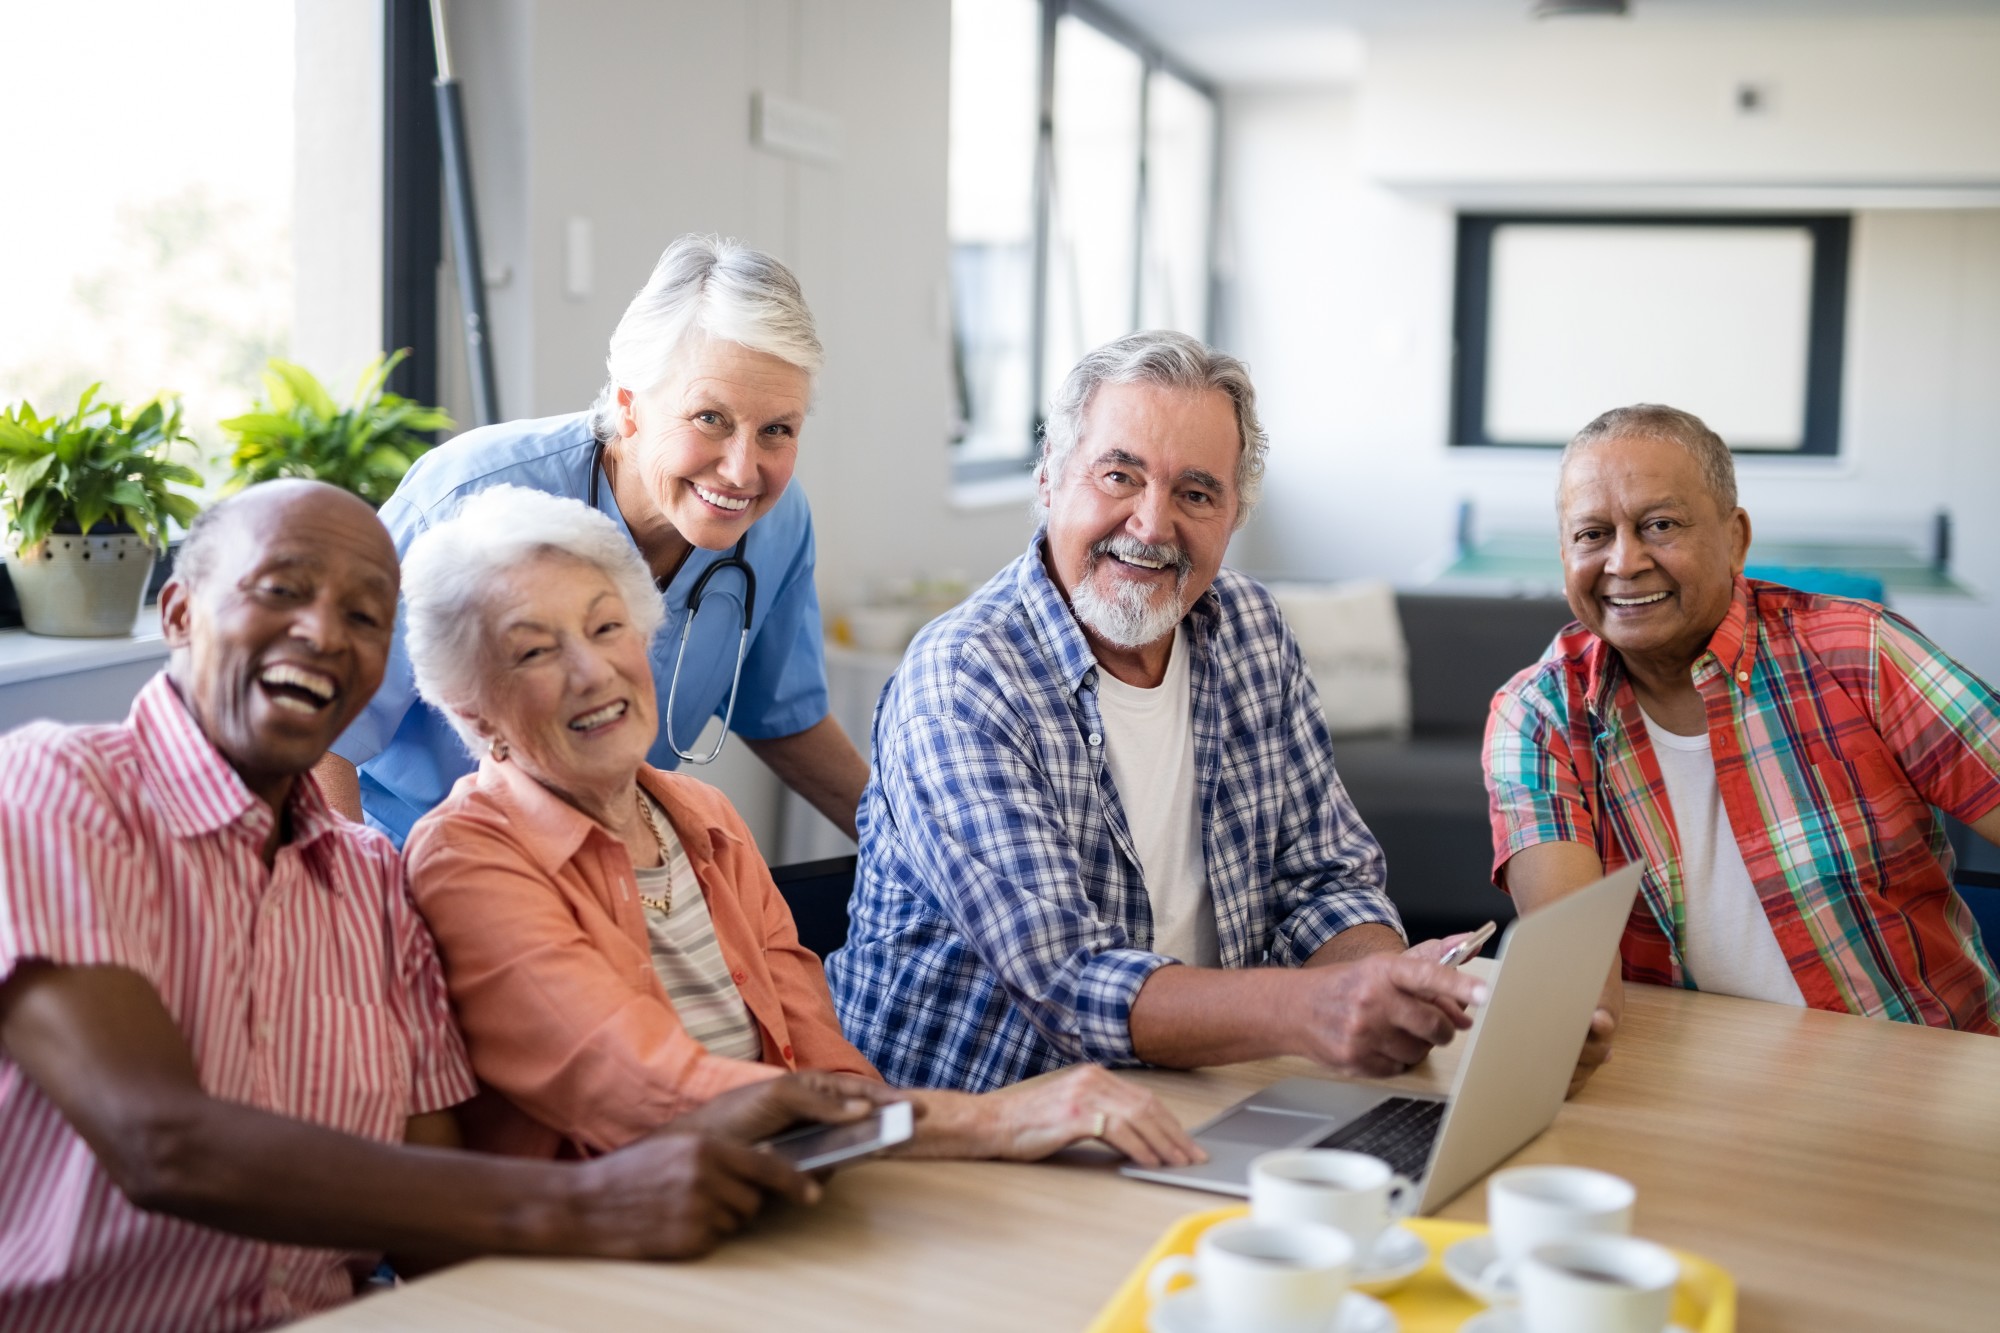 Finding the right community for a relative to retire in requires knowing your options. Here is everything to know about how to select a retirement community.